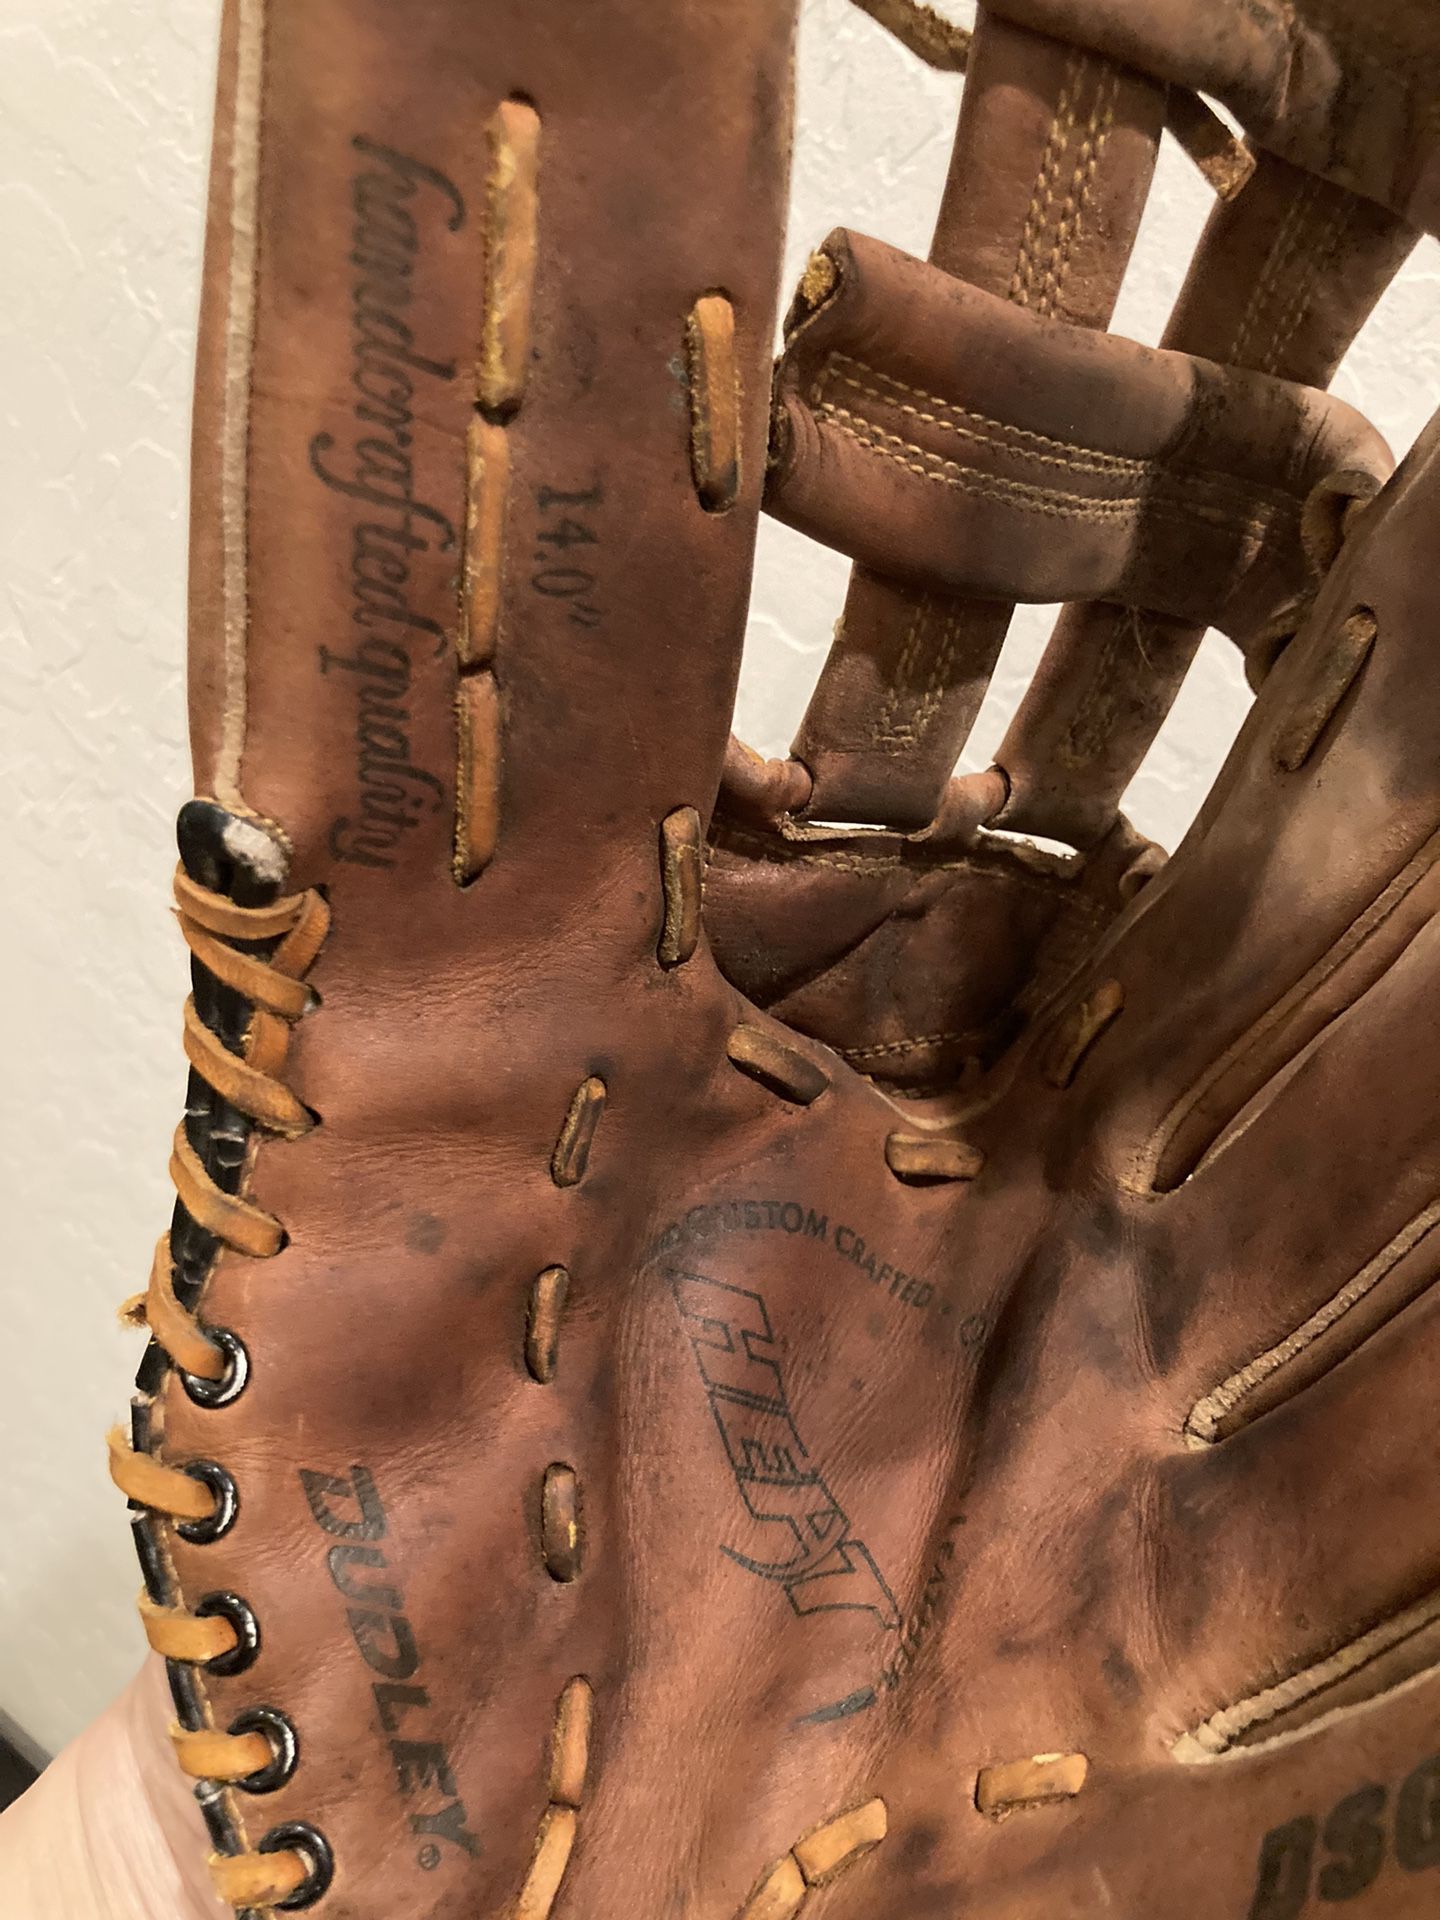 14 Inch Baseball Left Handed Glove In Peoria 